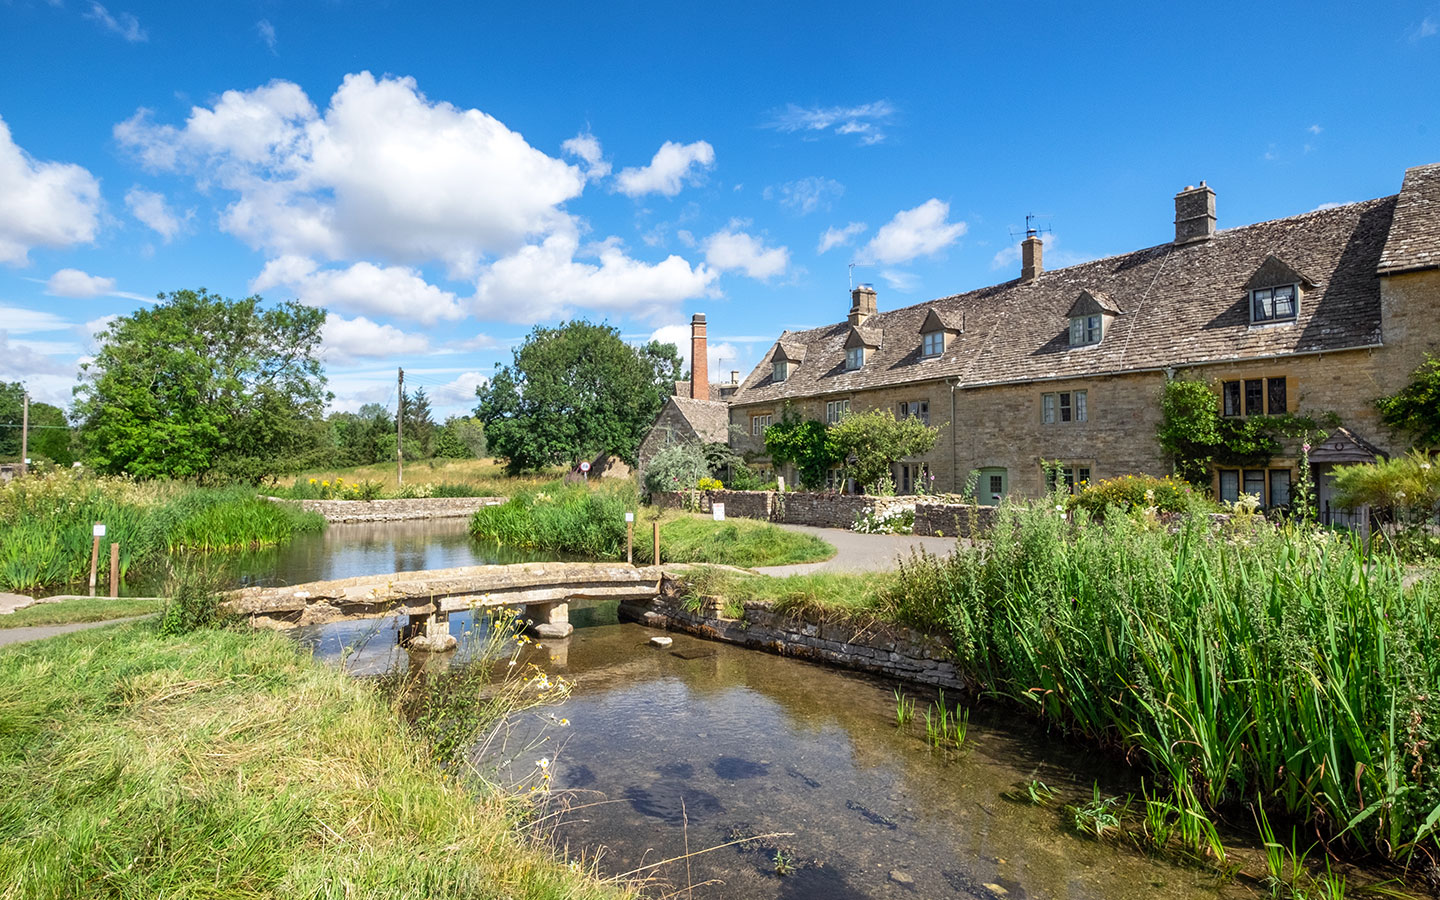 Lower Slaughter, filming location for 2020's Emma